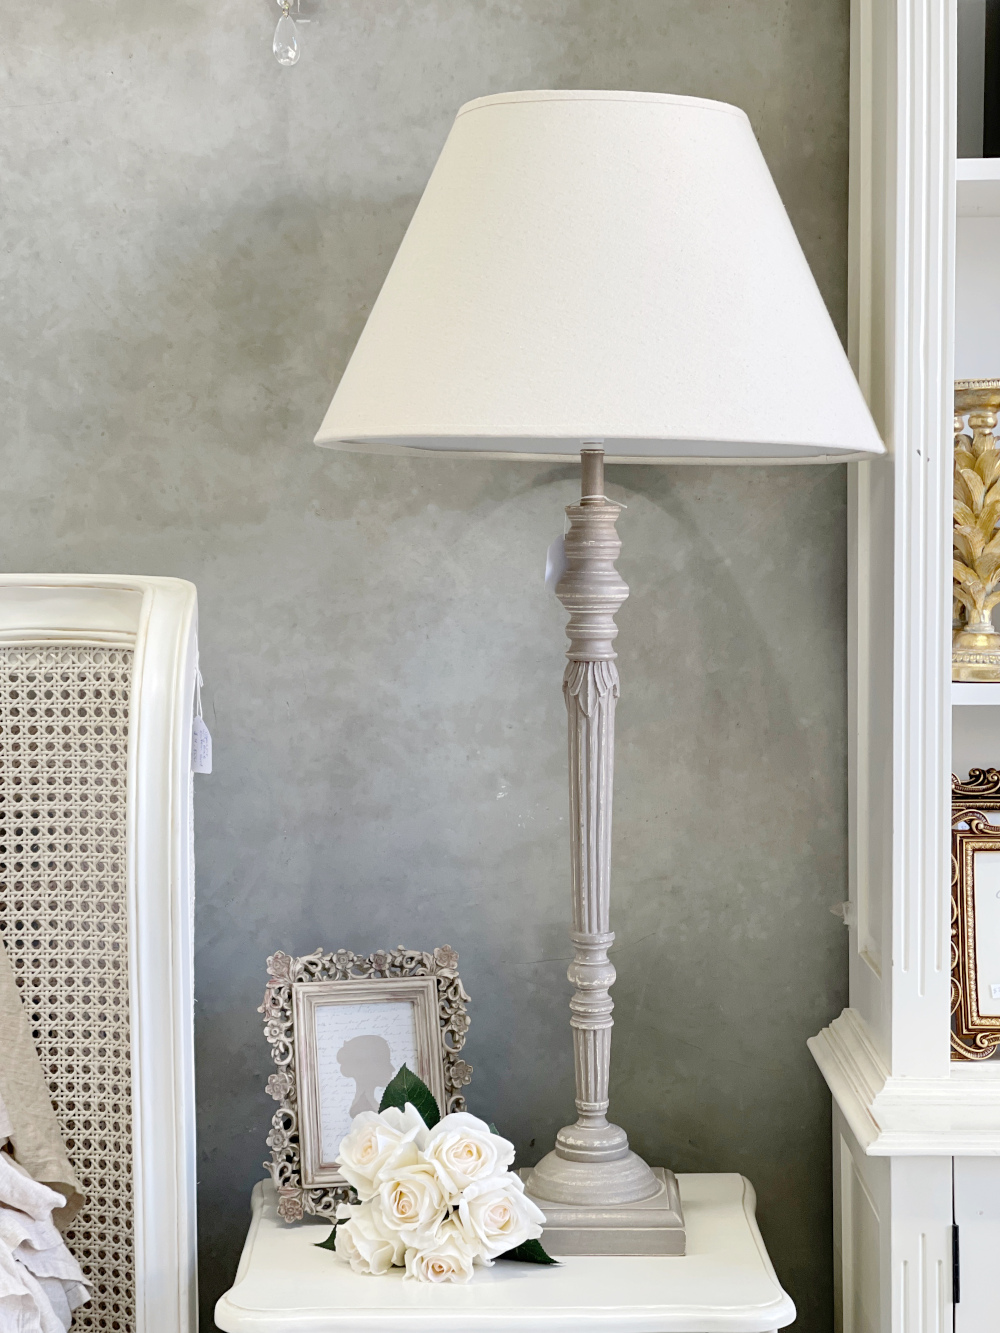 Havana Shabby Chic Table Lamp, French Provincial Table Lamps